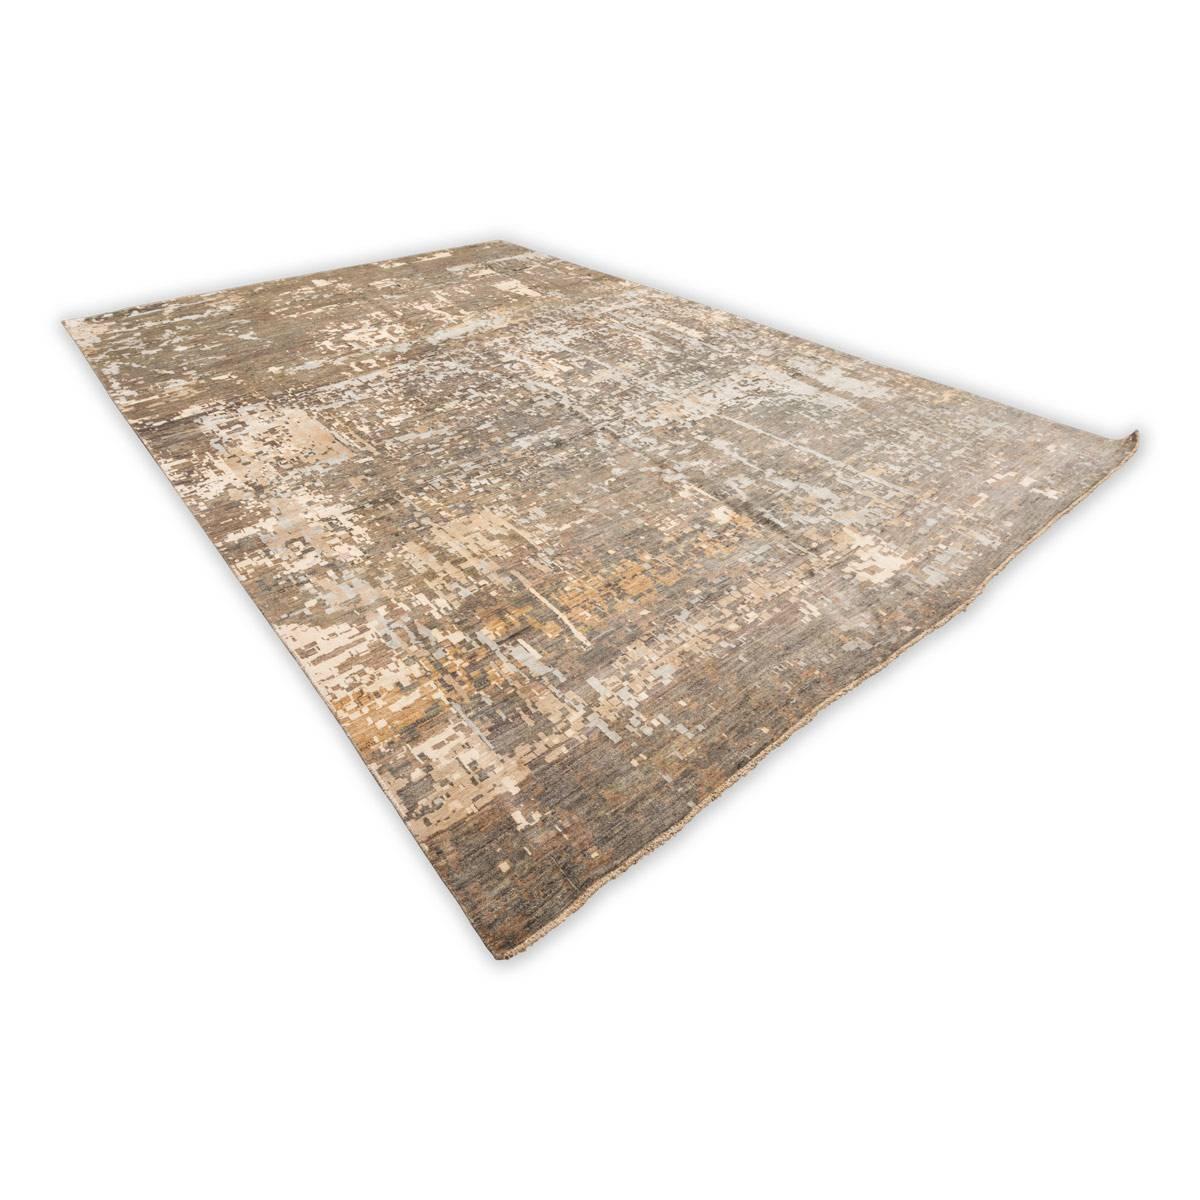 Contemporary rug made by hand in silk and wool. Measures: 3.00 x 4.30 m.
- Rug belonging to the abstract collection.
- Modern design using a series of asymmetric spots in various shades of gray and beige in various shades.
- Being hand-crafted,